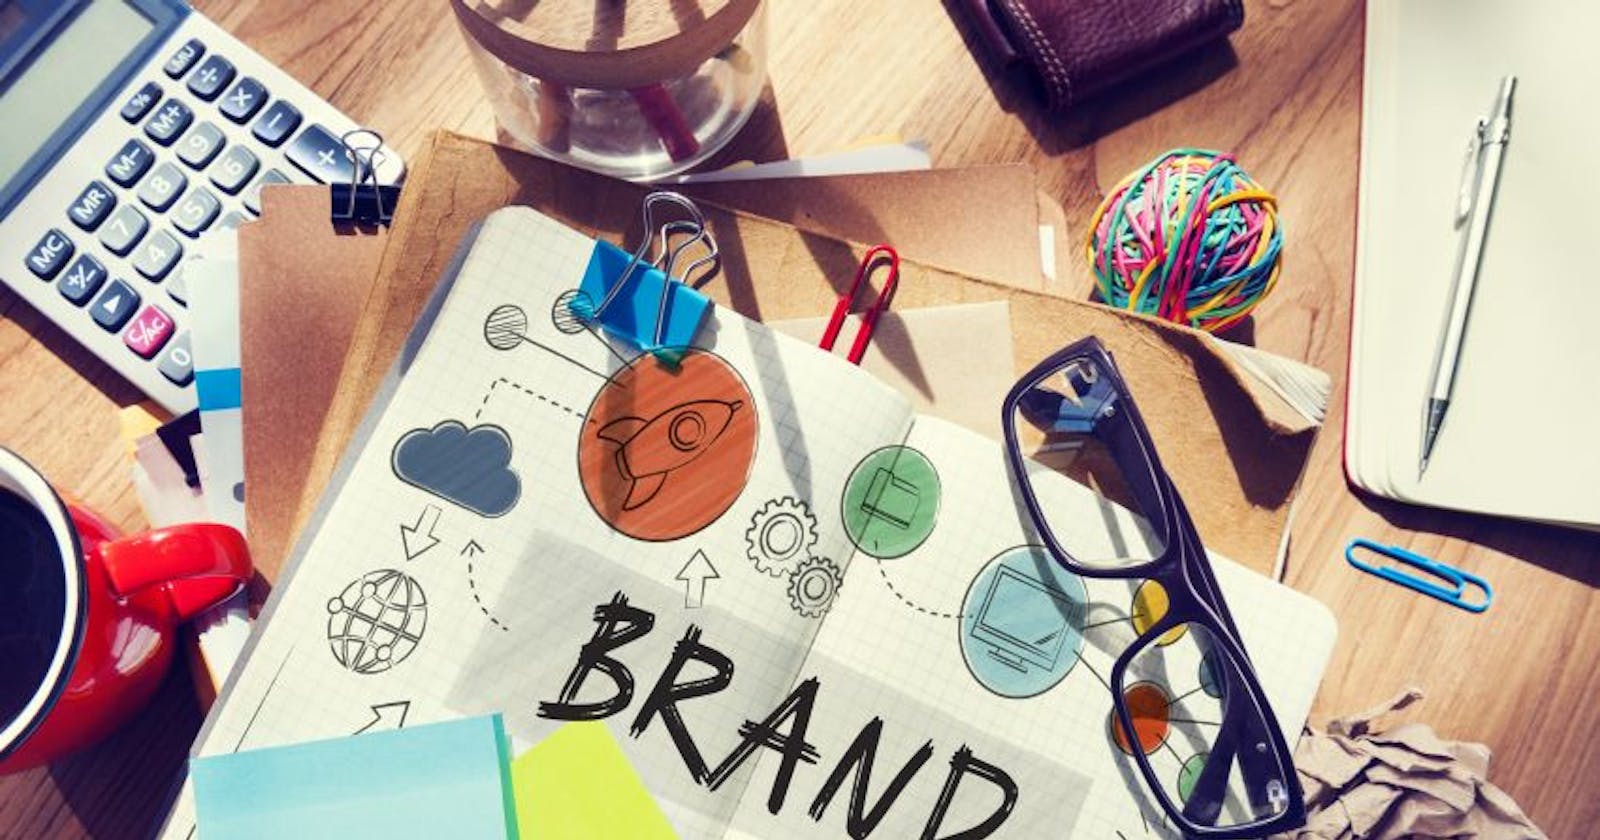 How to create your personal brand?